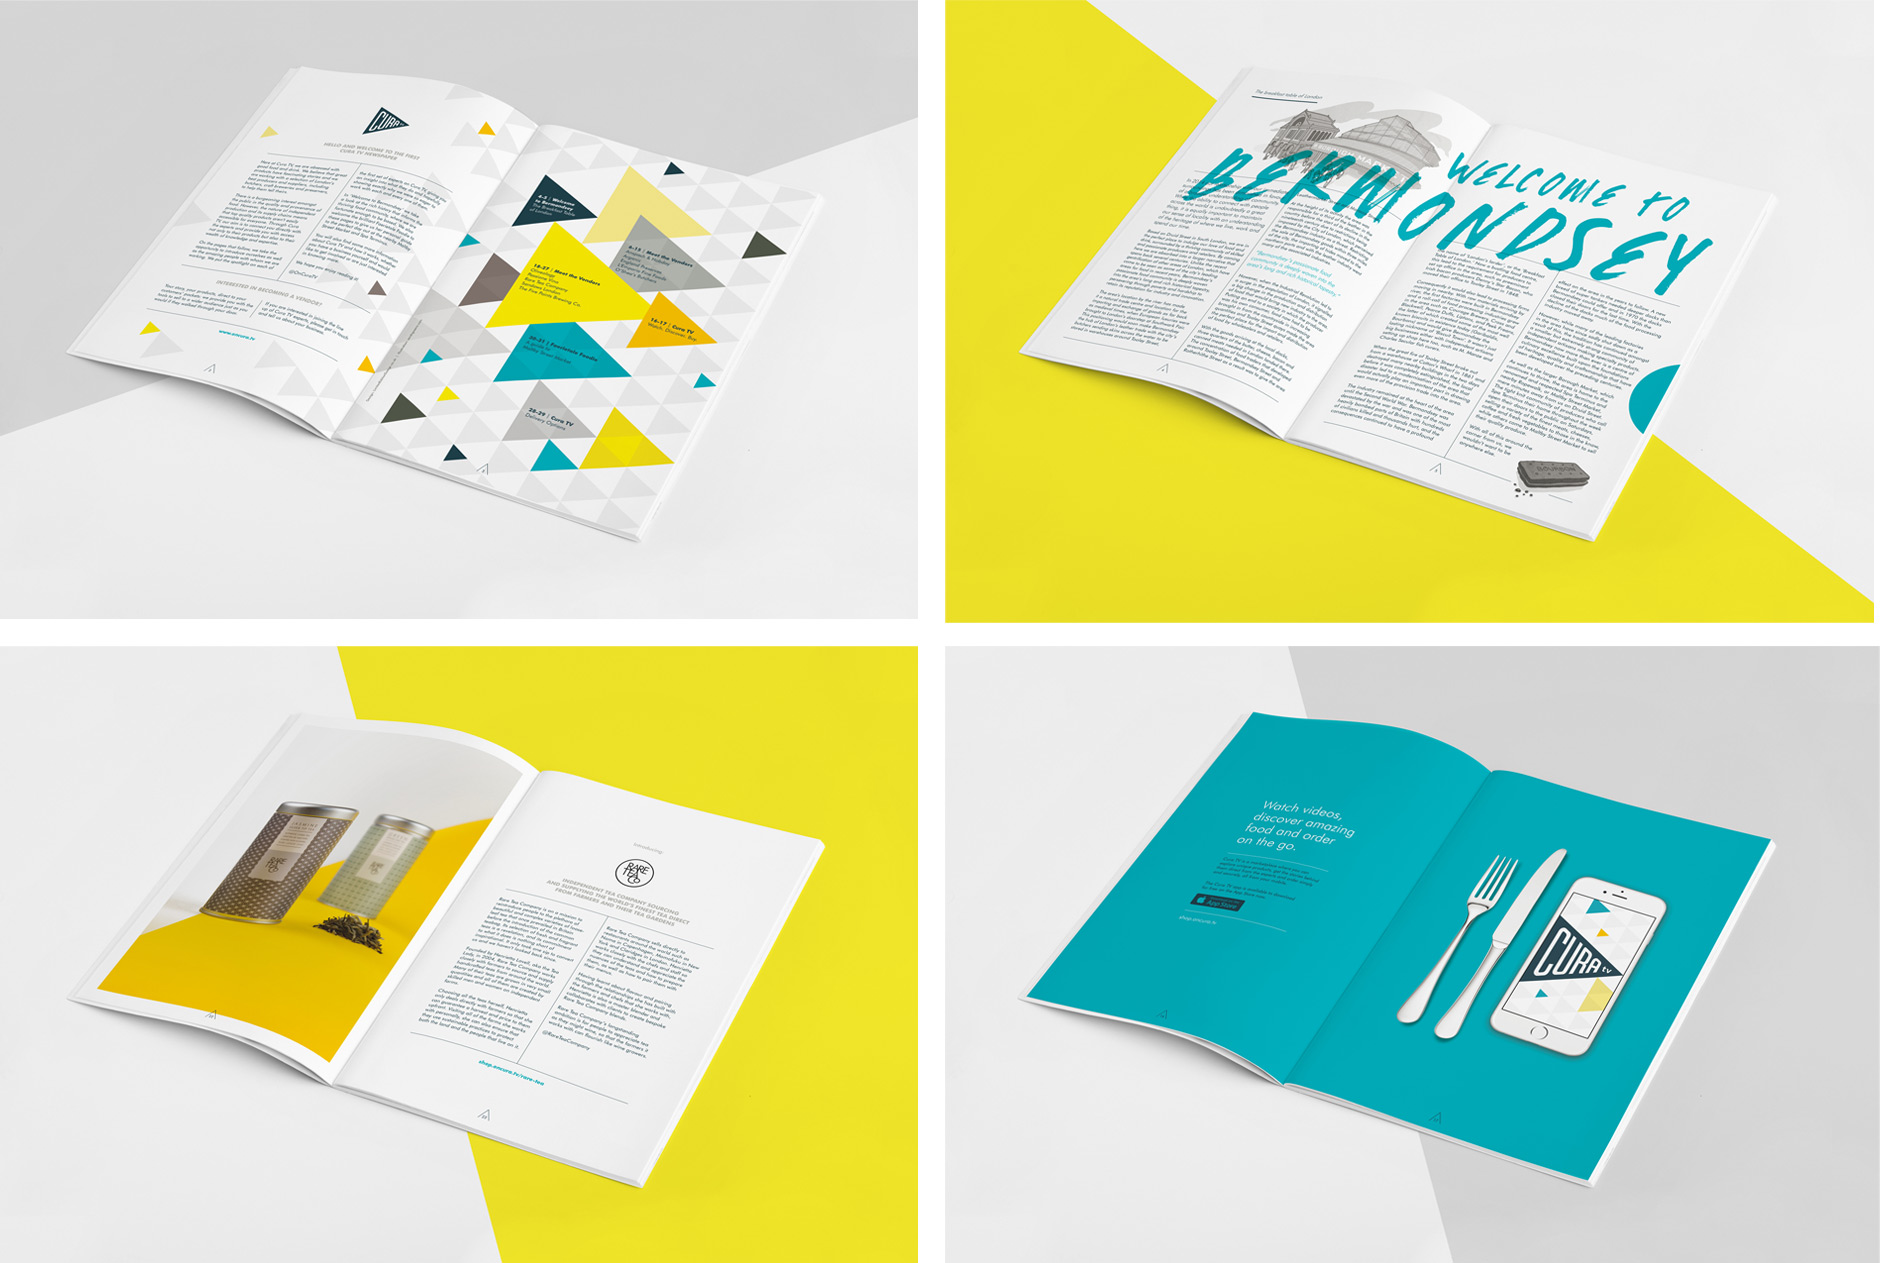 Cura newspaper by LimitedEditionDesign